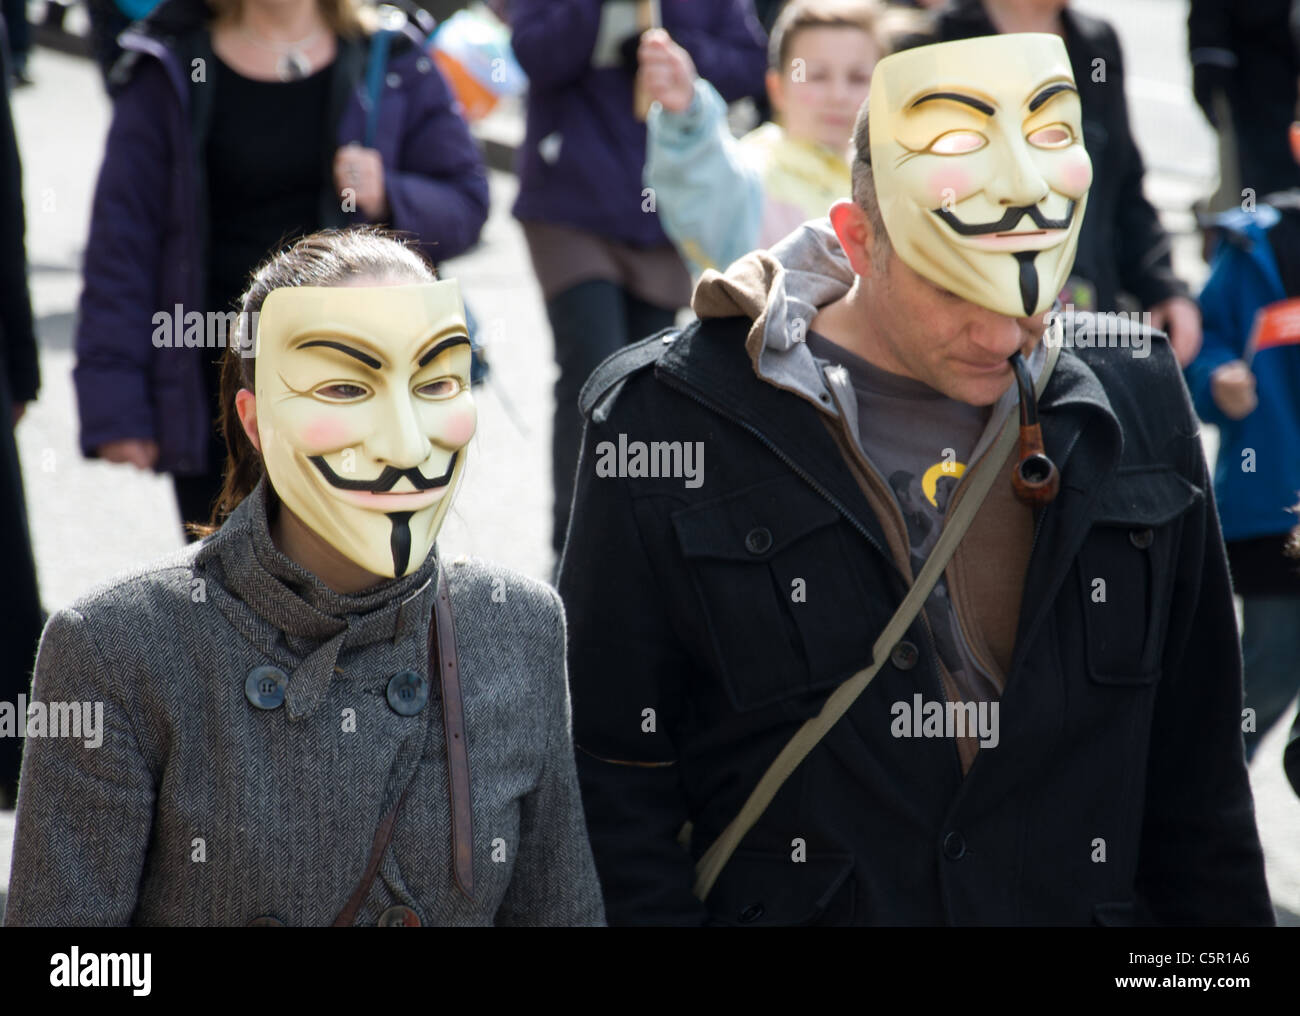 V for Vendetta masks on 2 marchers at G20 March in London on 28th March 2009 Stock Photo